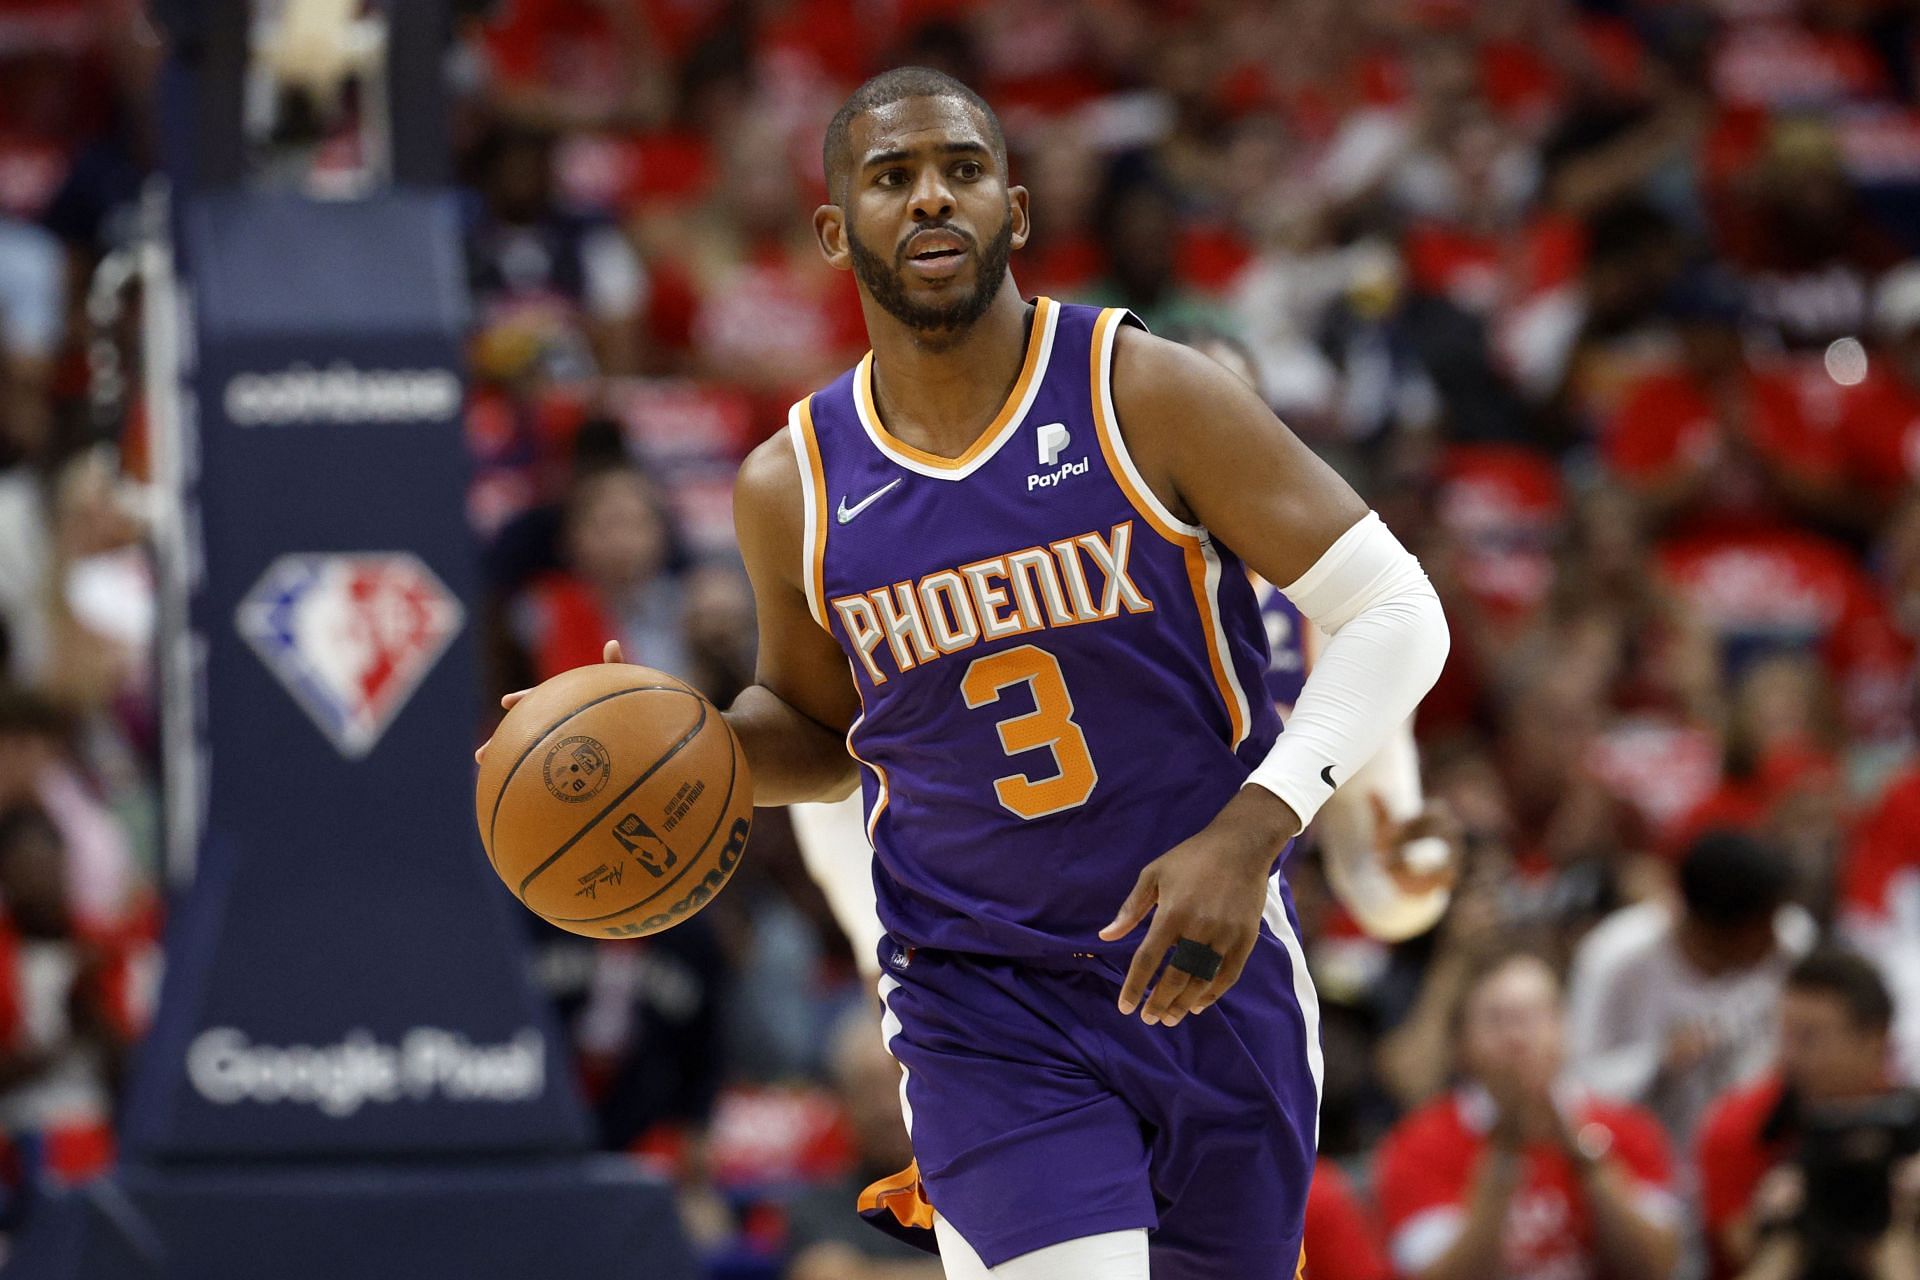 Chris Paul of the Phoenix Suns dribblers against the New Orleans Pelicans at Smoothie King Center on Thursday in New Orleans, Louisiana.